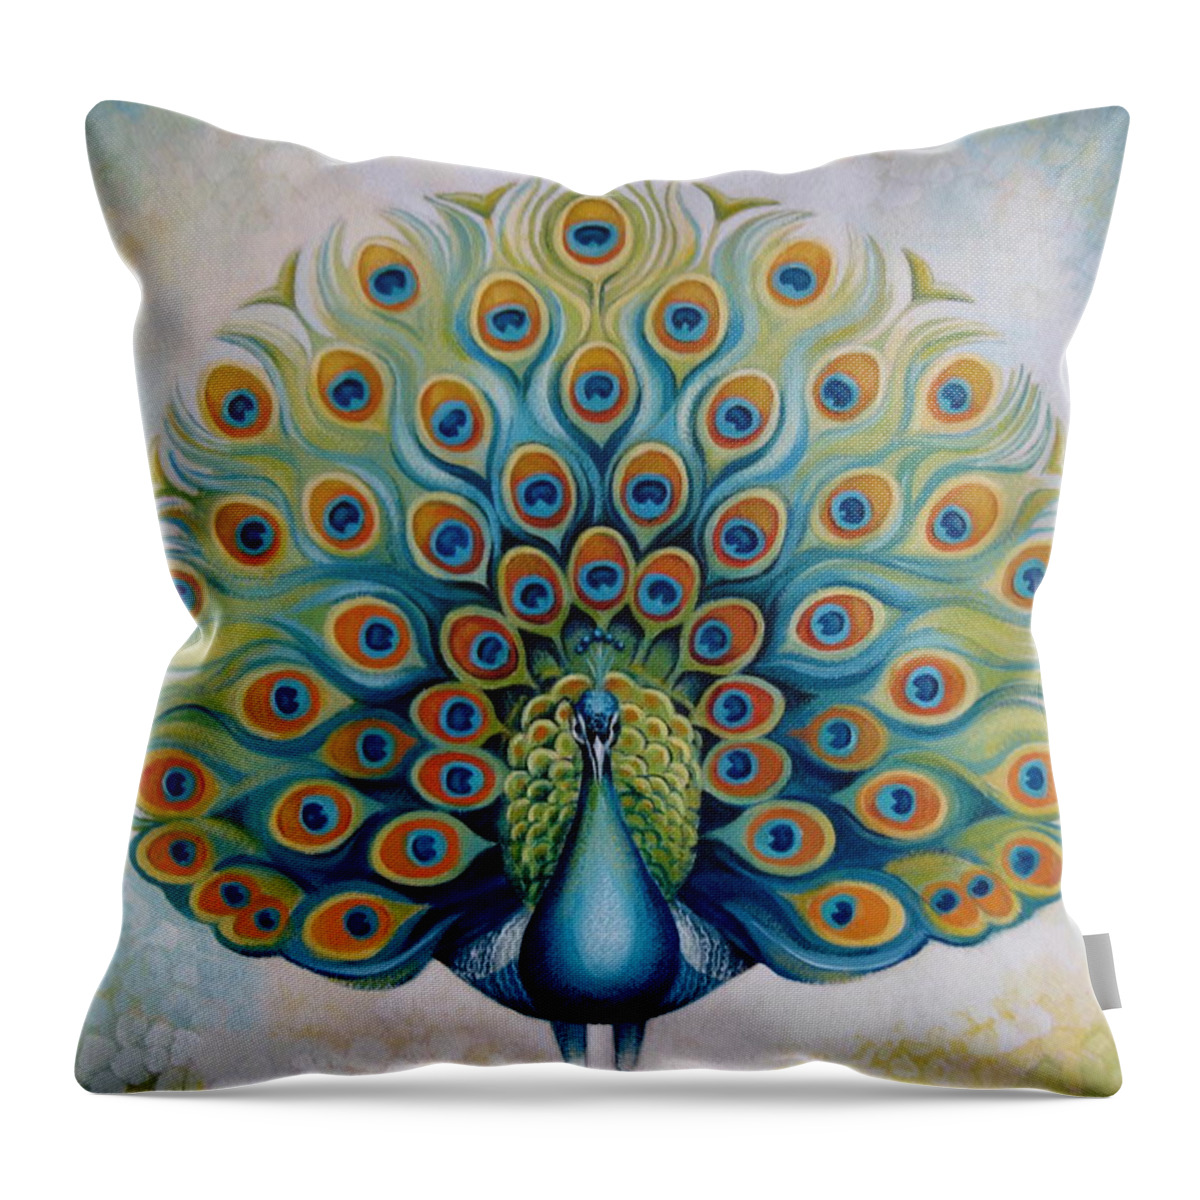 Peacock Throw Pillow featuring the painting Peacock by Elena Oleniuc